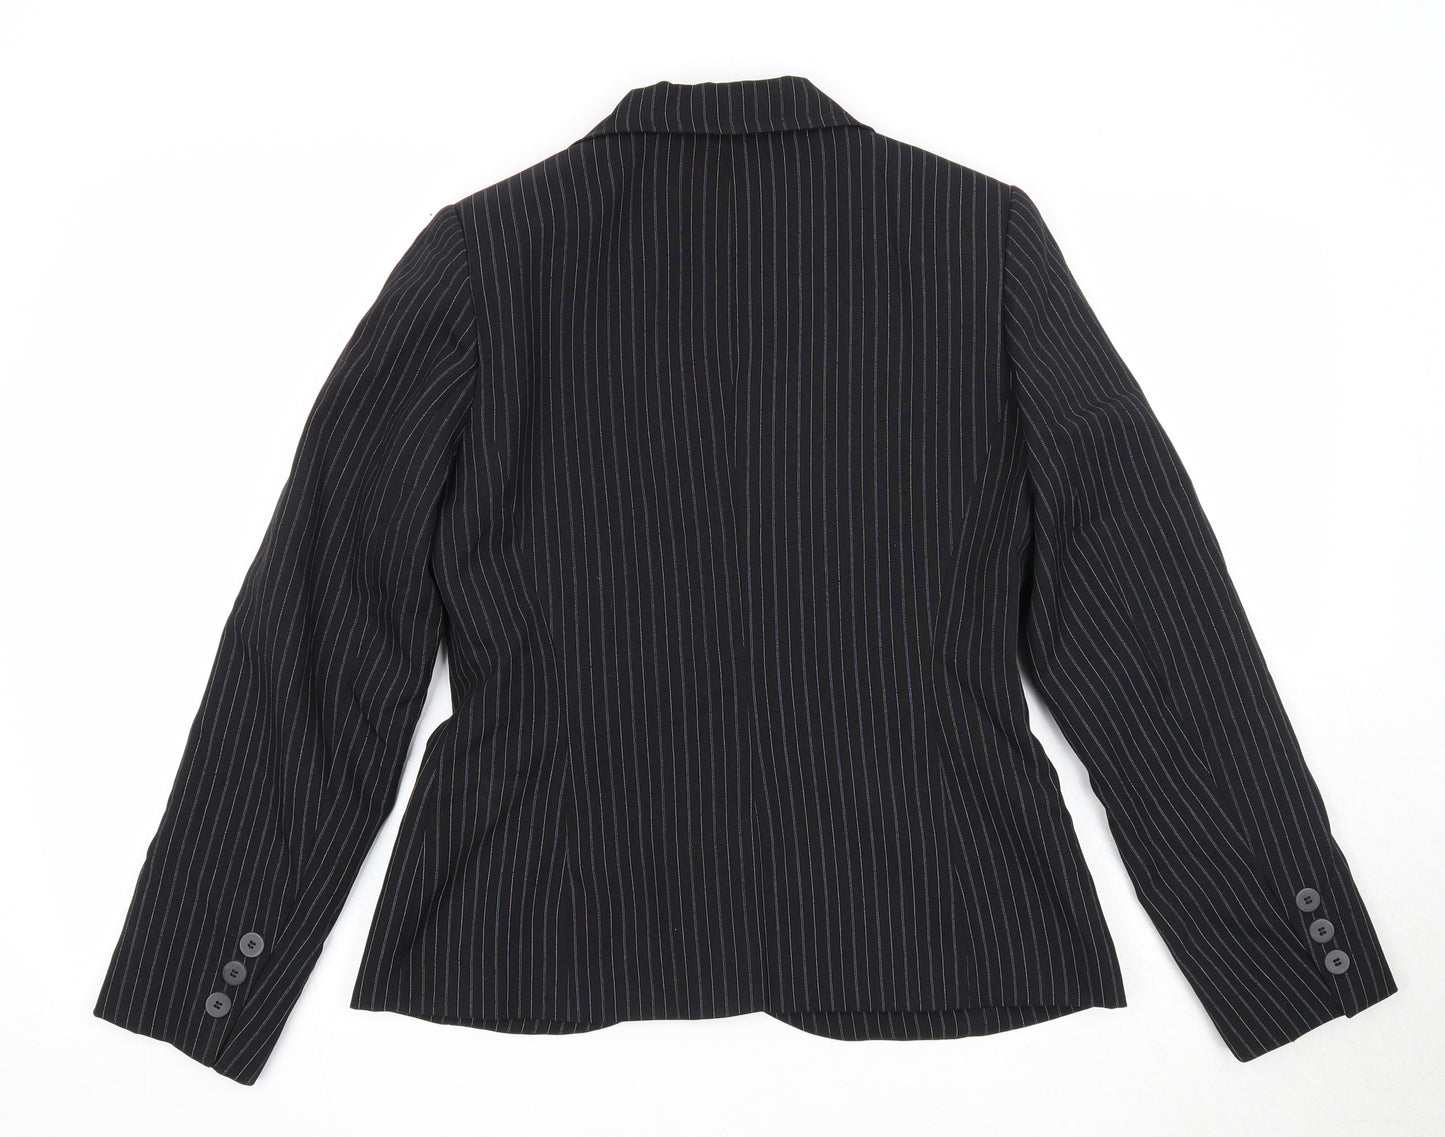 New Look Womens Black Striped Polyester Jacket Suit Jacket Size 14